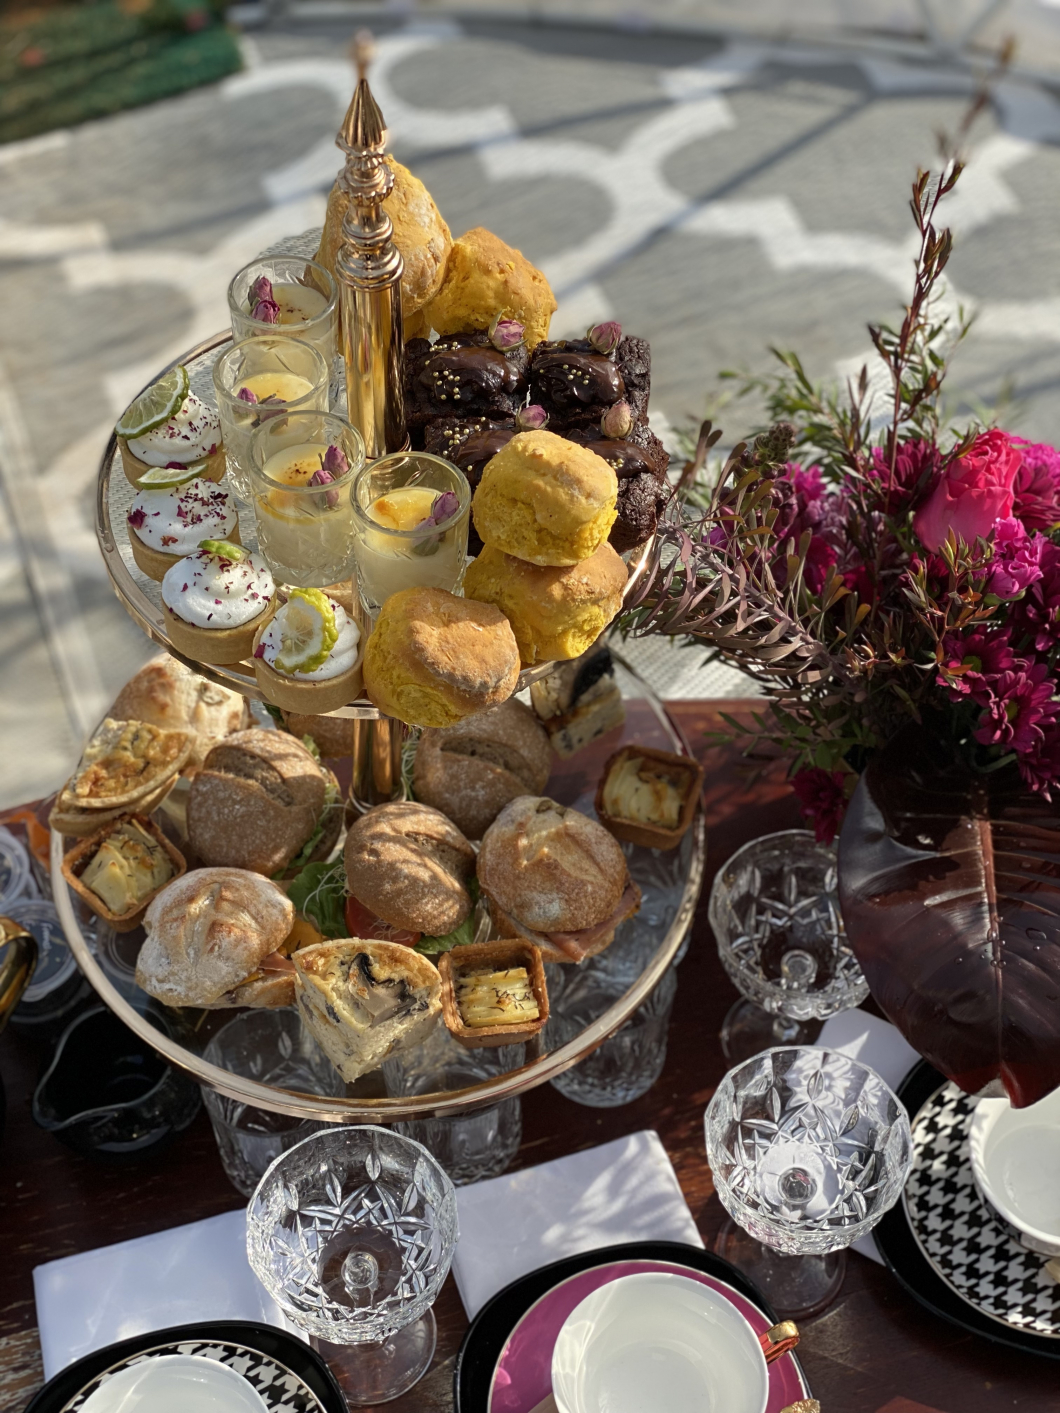 Enjoy high tea at home or at one of The High Tea Mistress's exciting locations. 